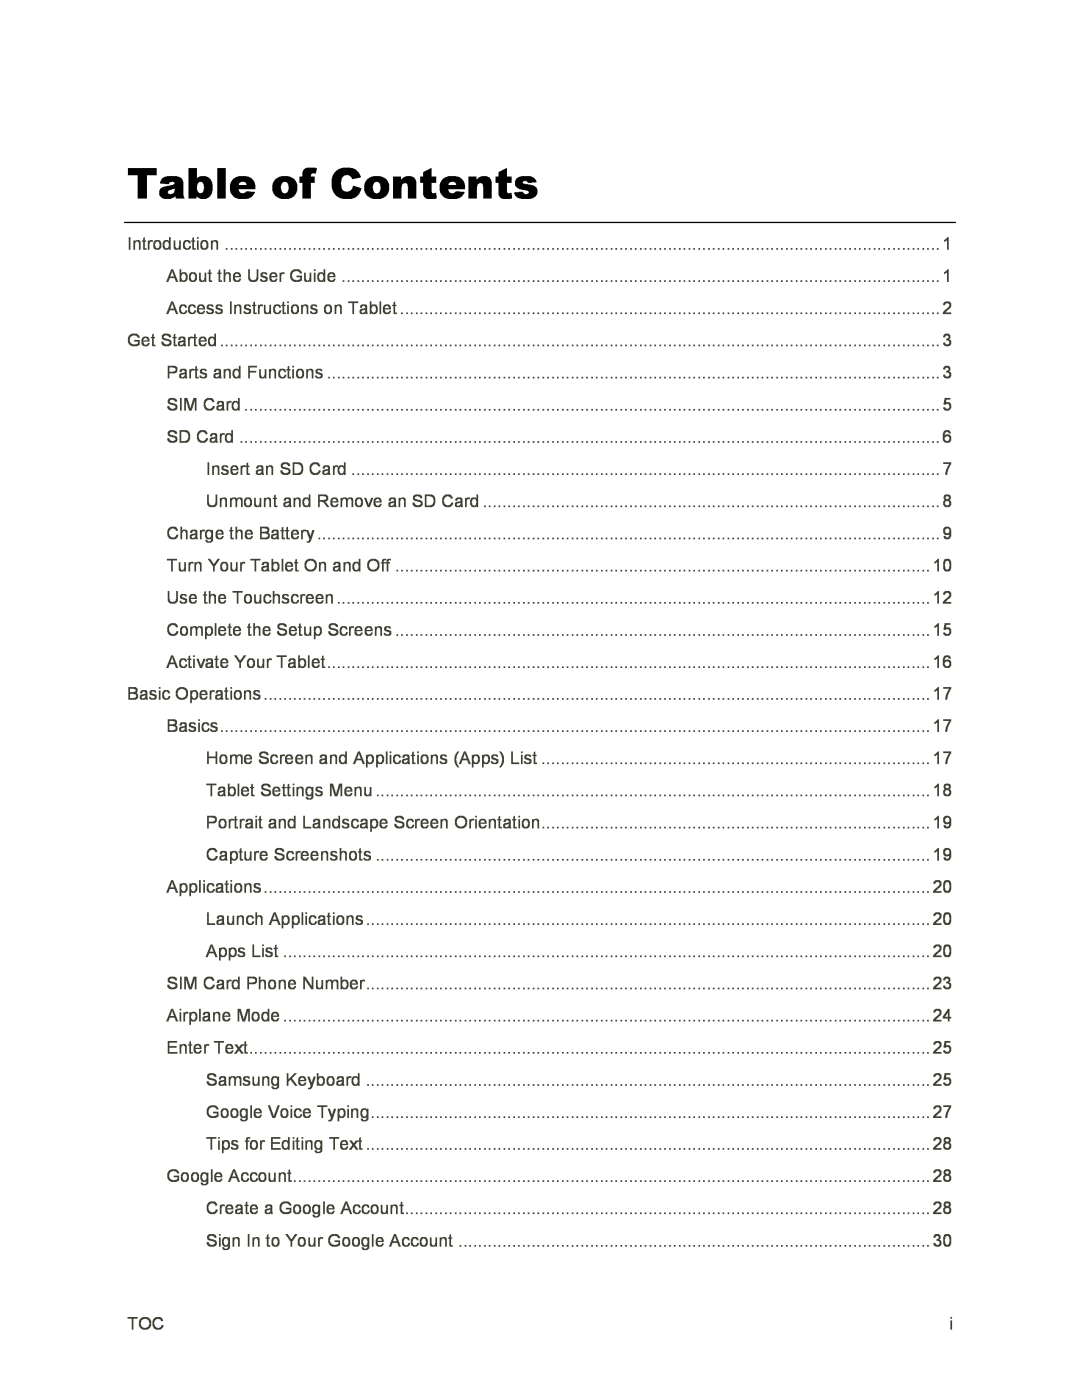 Table of Contents Galaxy Tab S2 9.7 Sprint